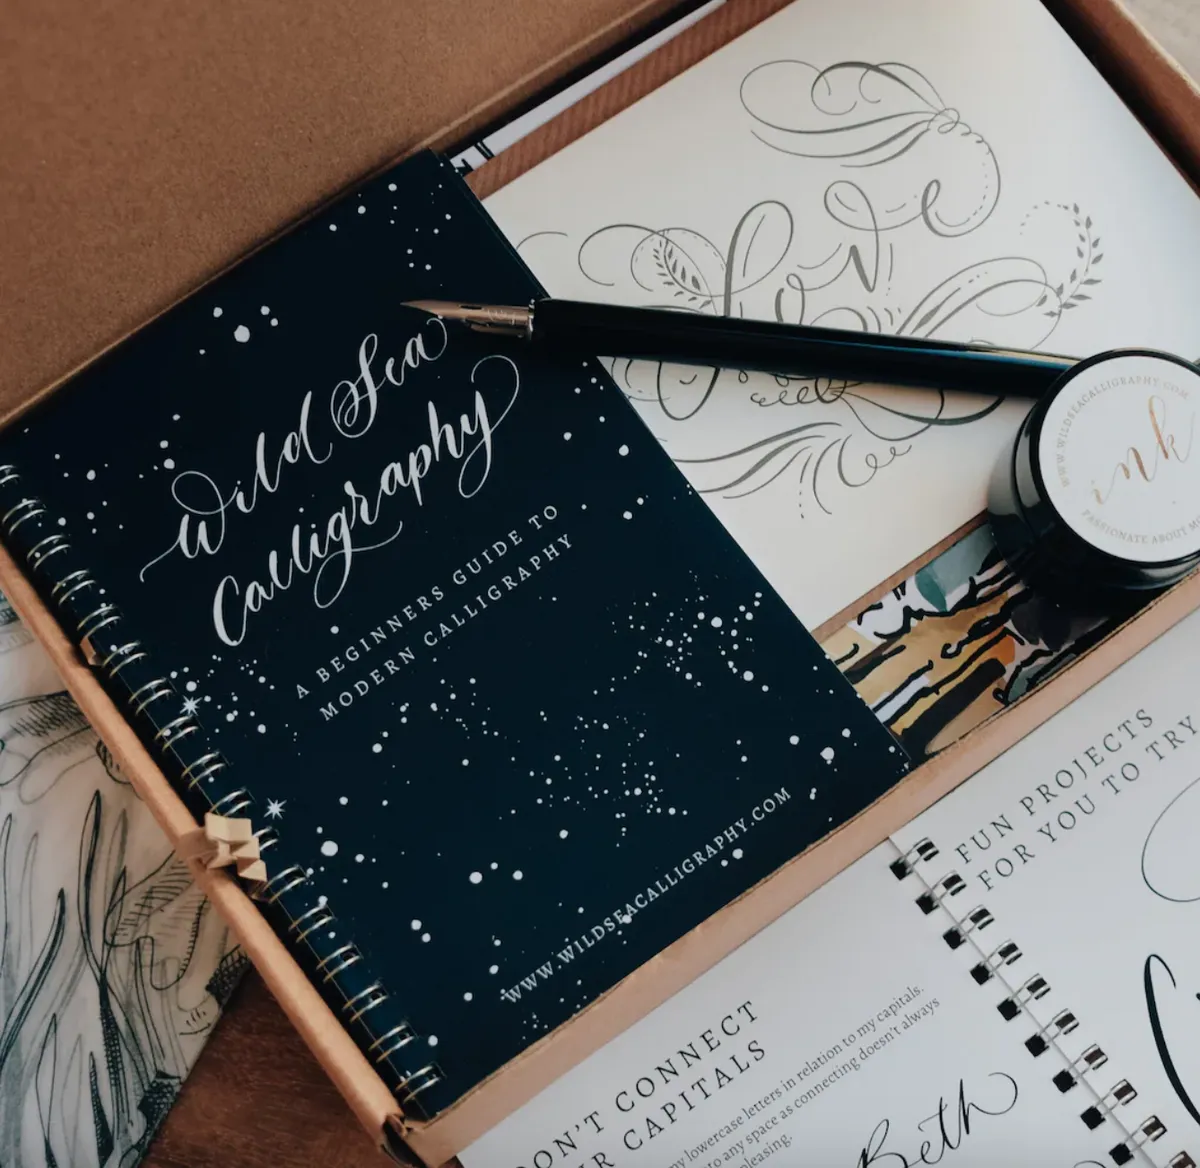 Best Calligraphy Craft Kits for Beginners 2020